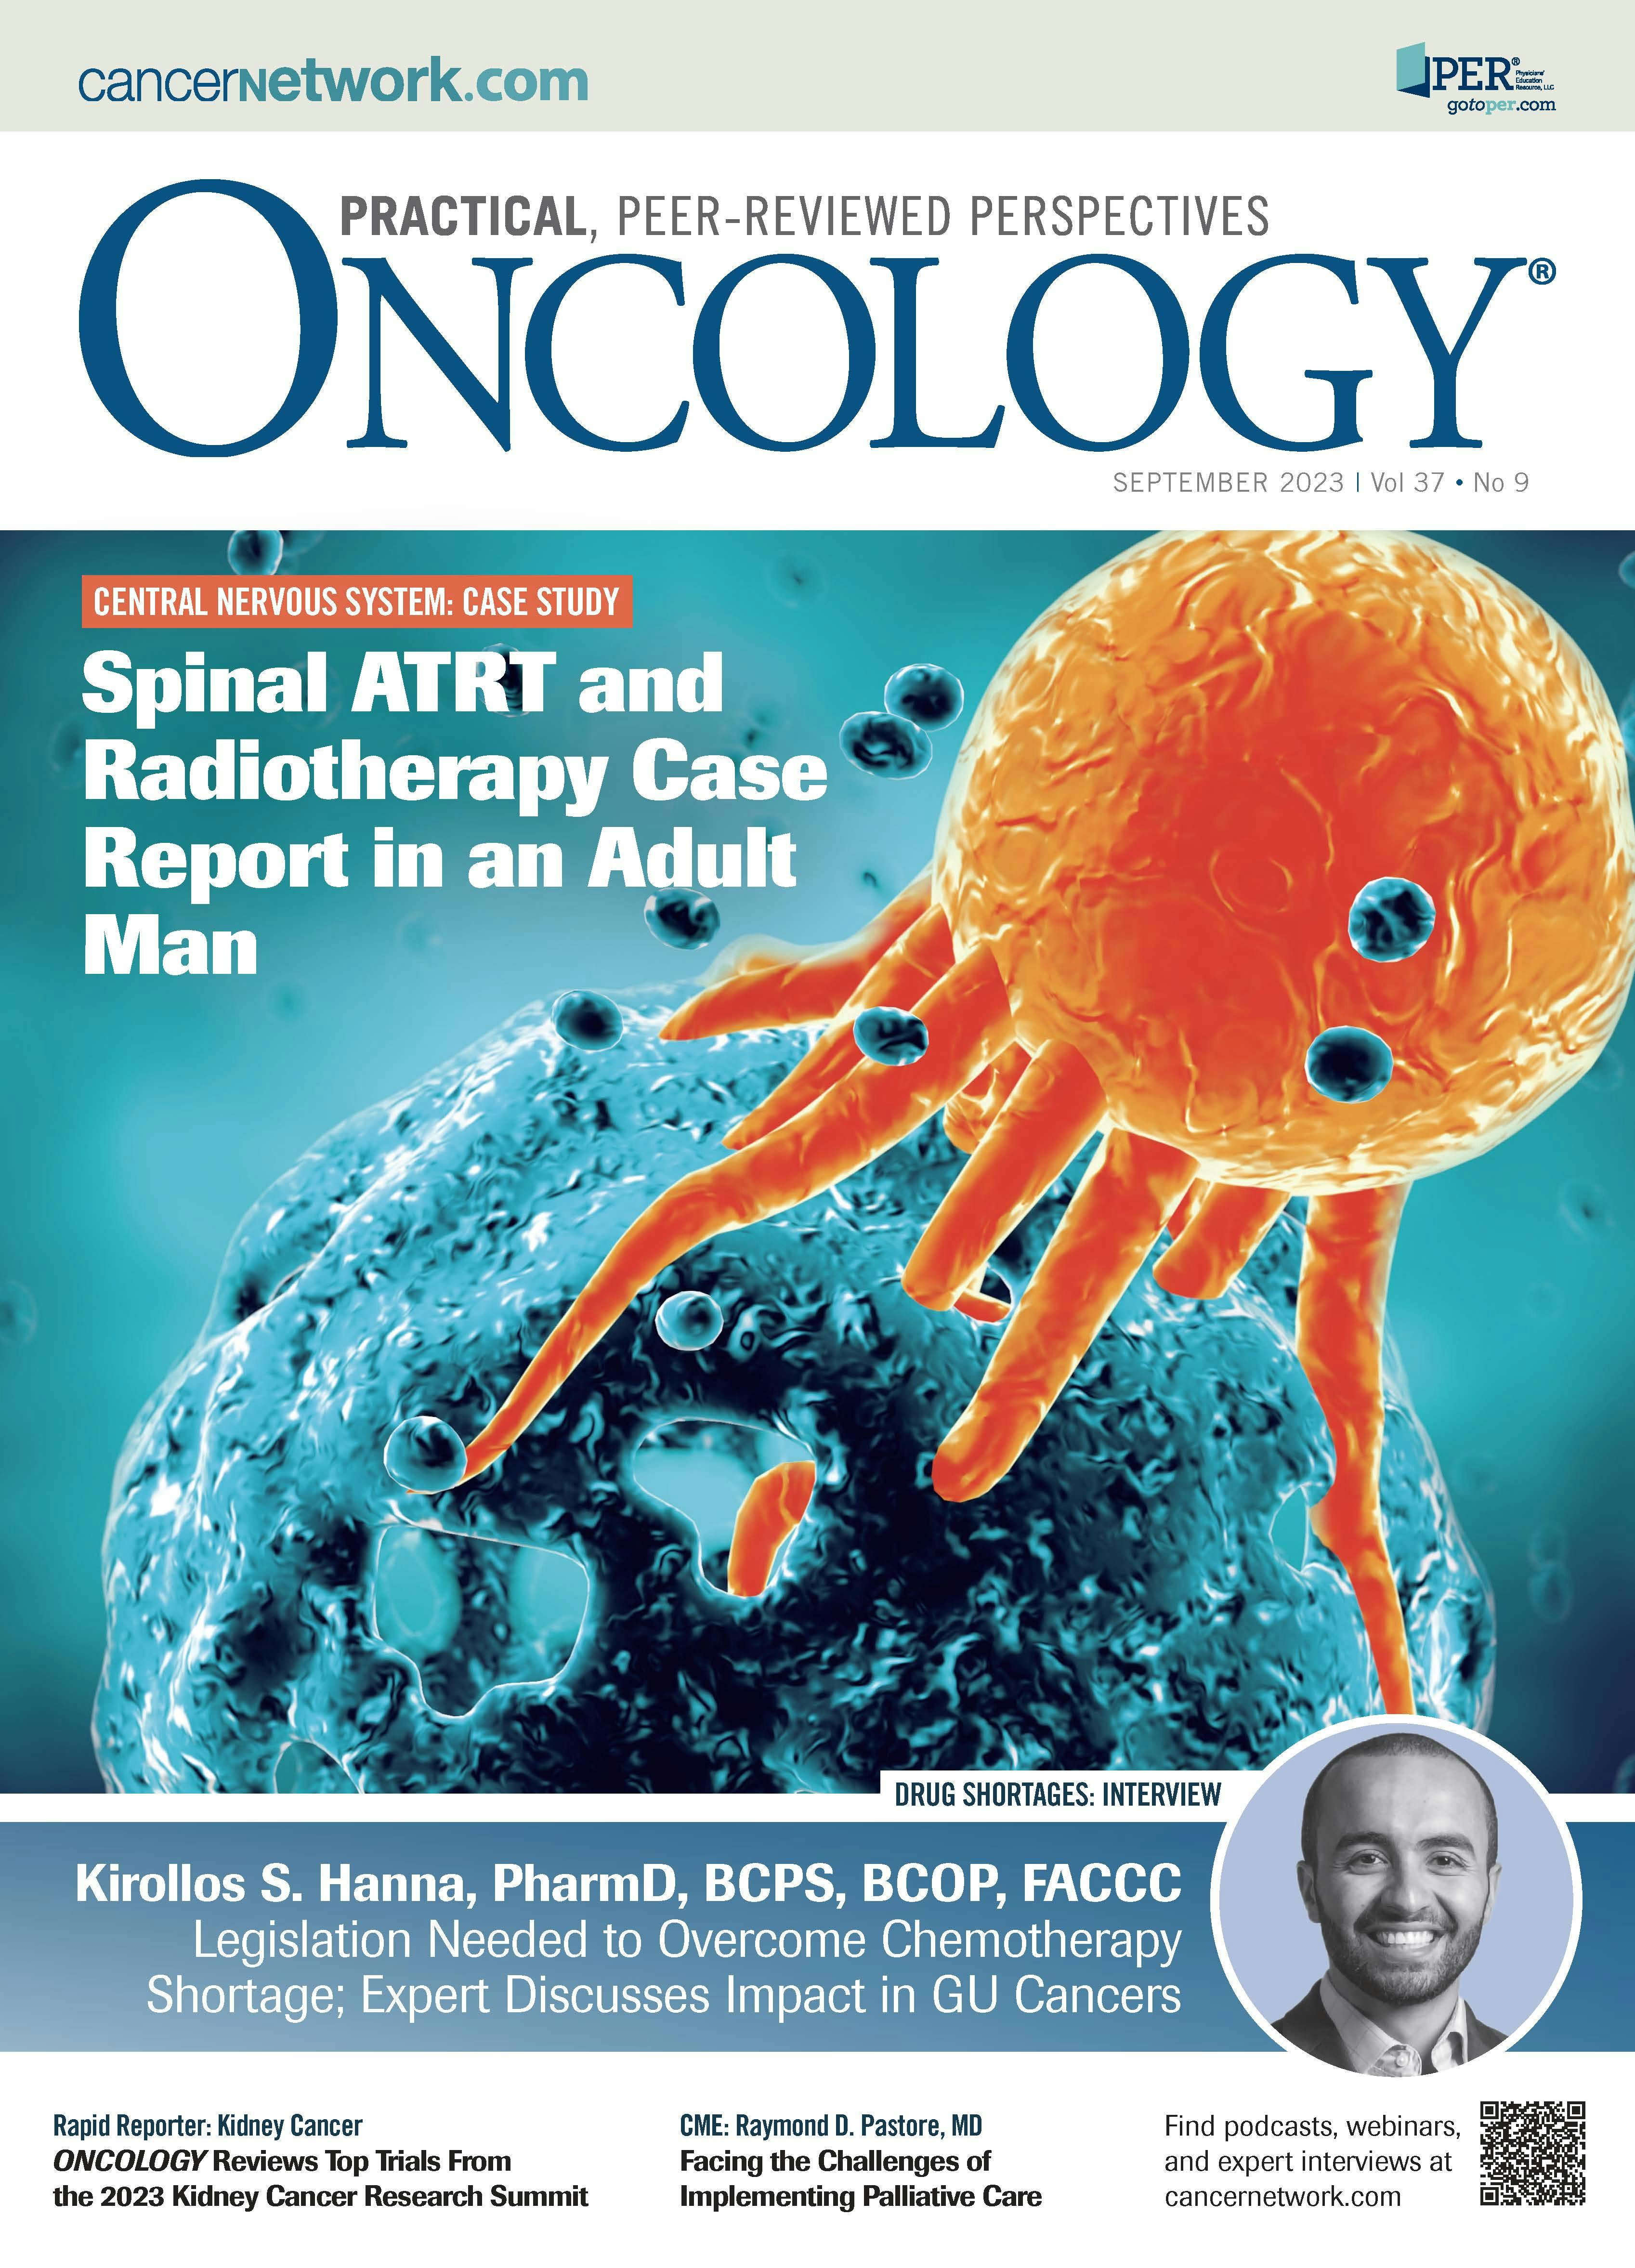 ONCOLOGY Vol 37, Issue 9